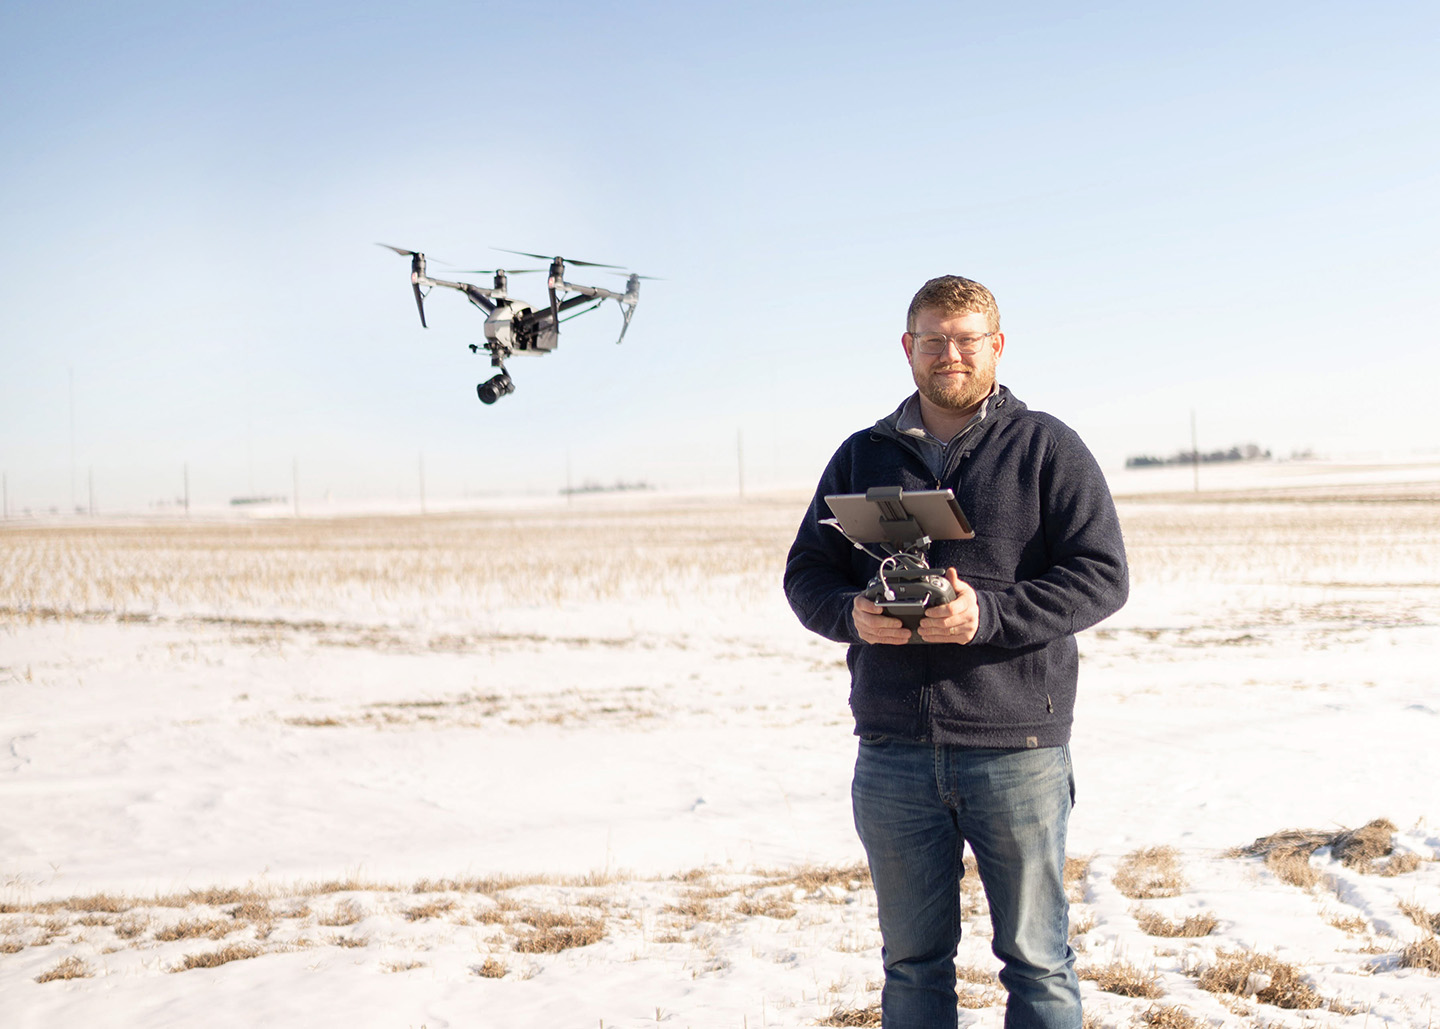 Iowa Soybean Association manager flying drone